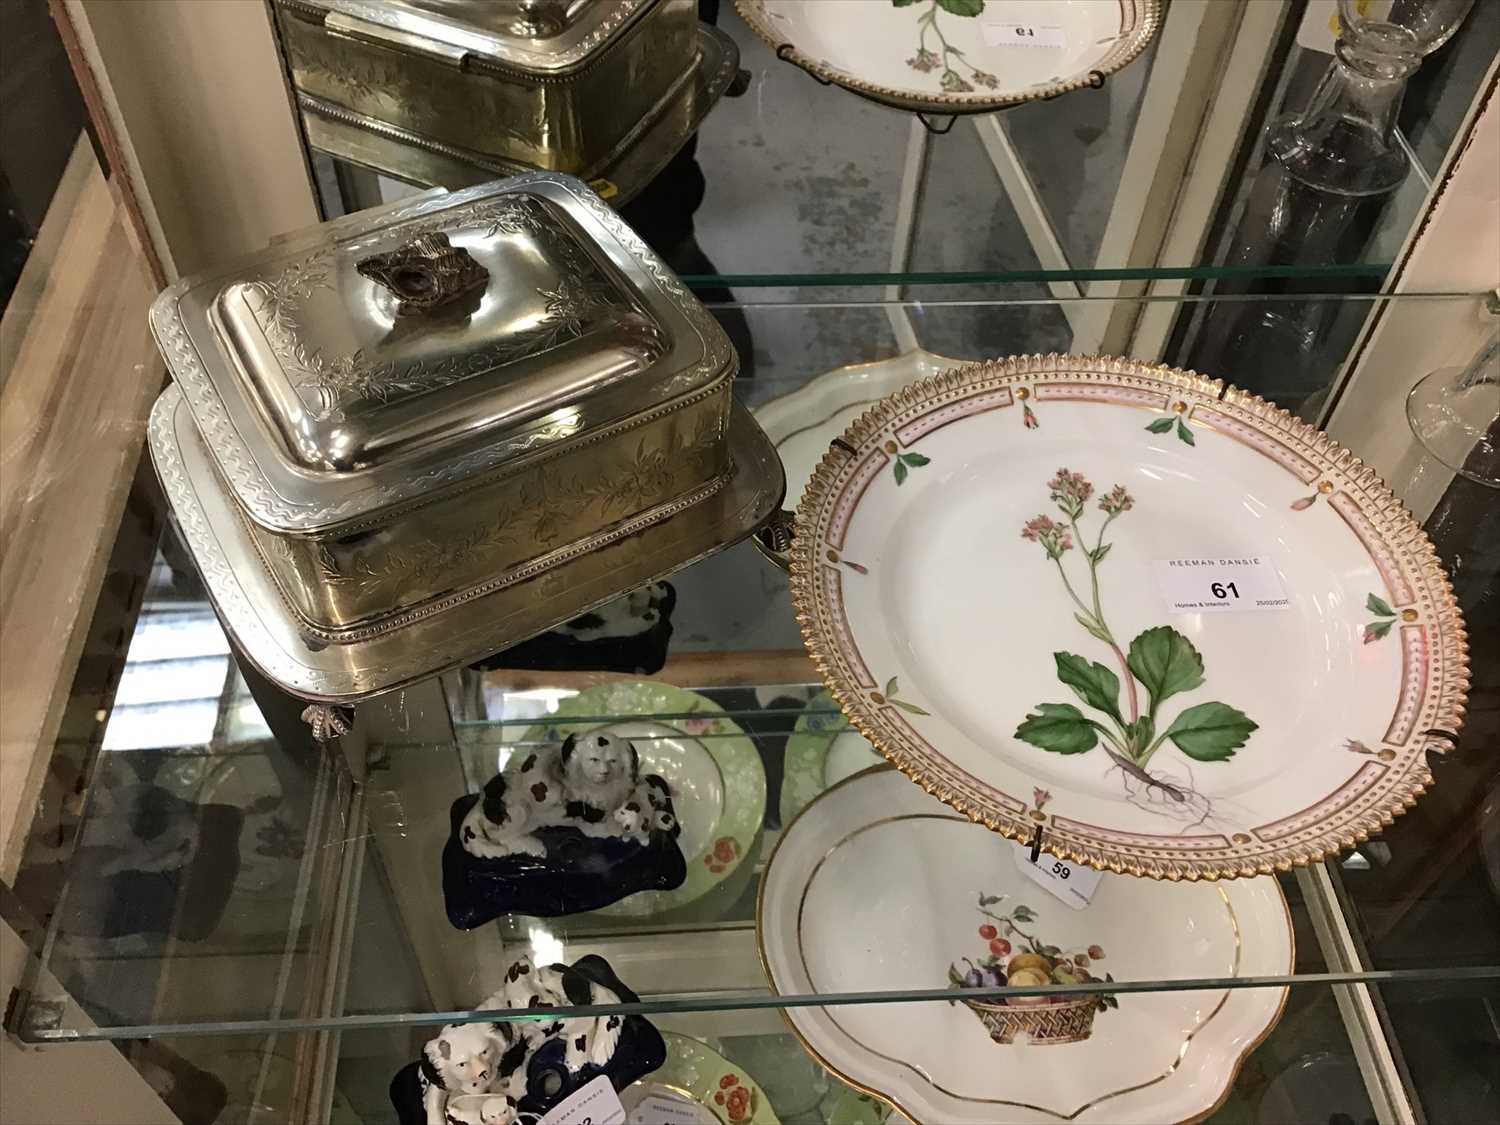 Lot 61 - Fine Royal Copenhagen dish, together with silver plated sardine box and cover